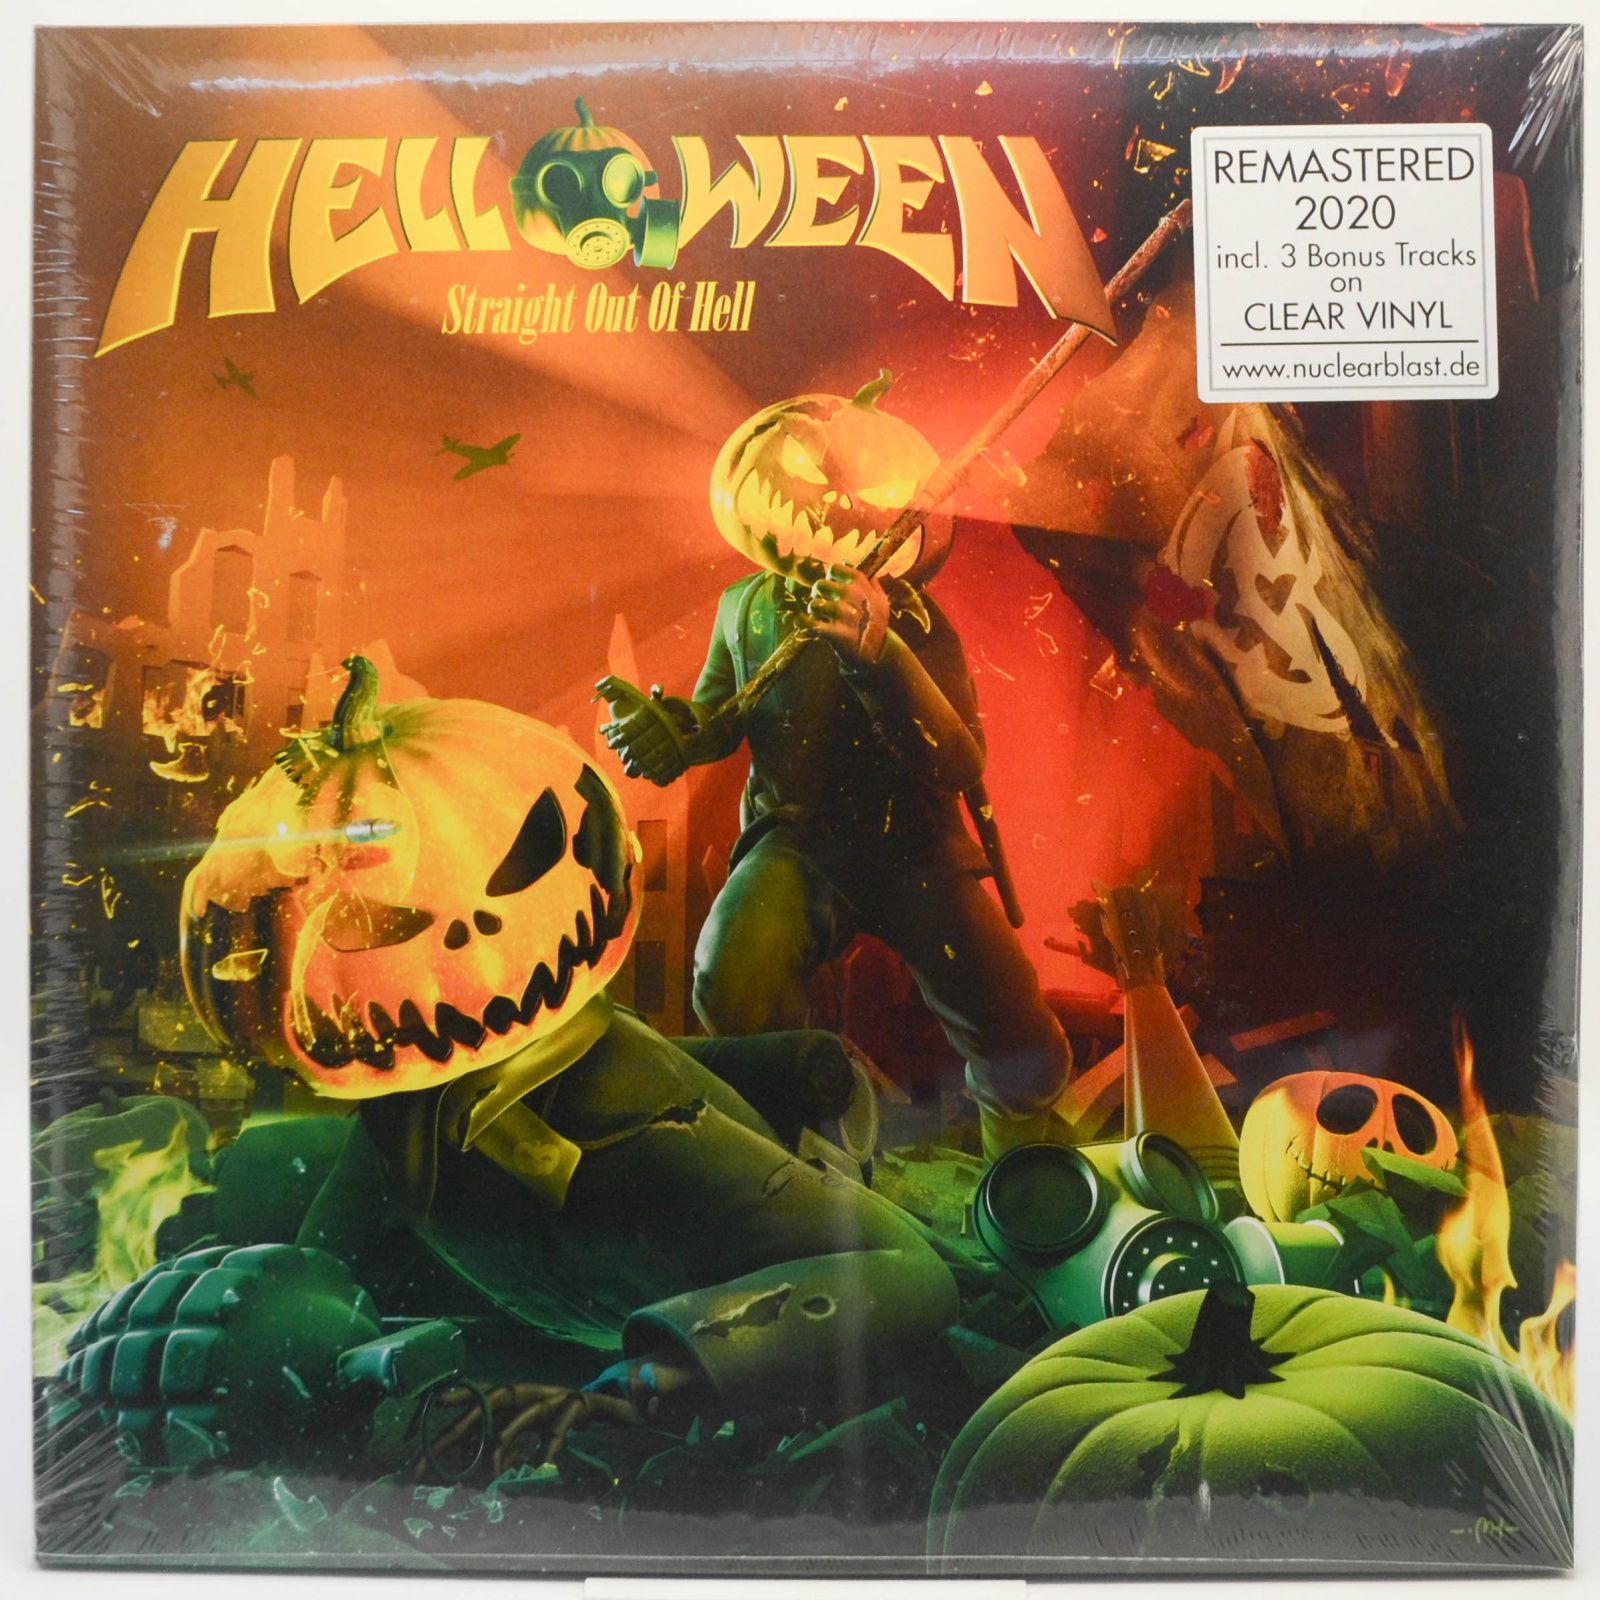 Helloween — Straight Out Of Hell (2LP), 2020